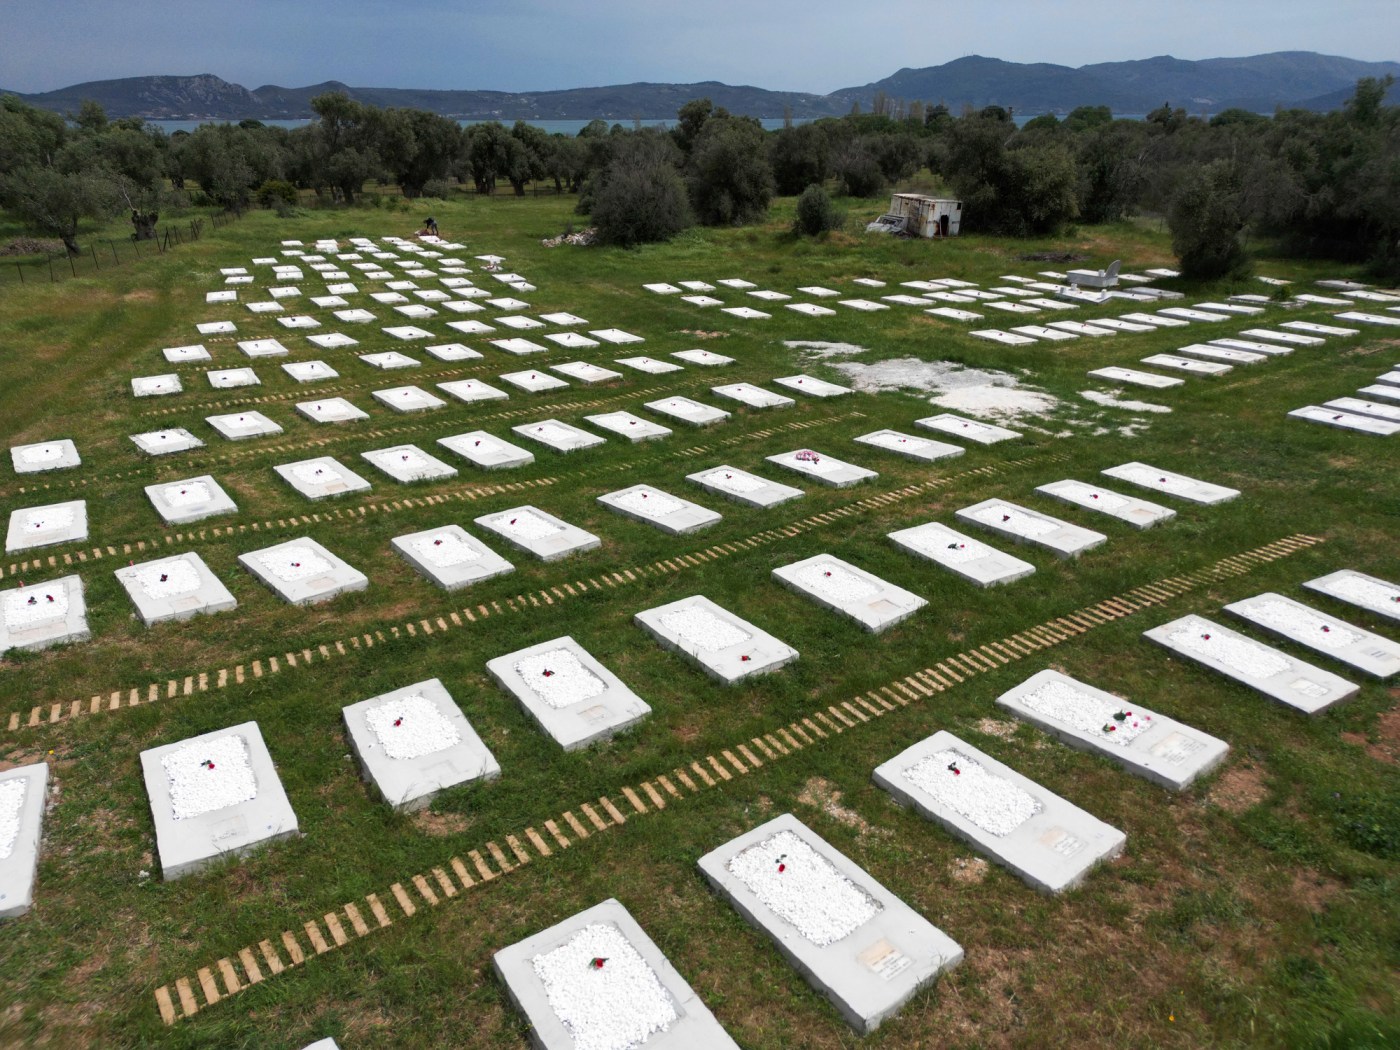 neglected-migrant-burial-ground-on-greek-island-gets-overhaul